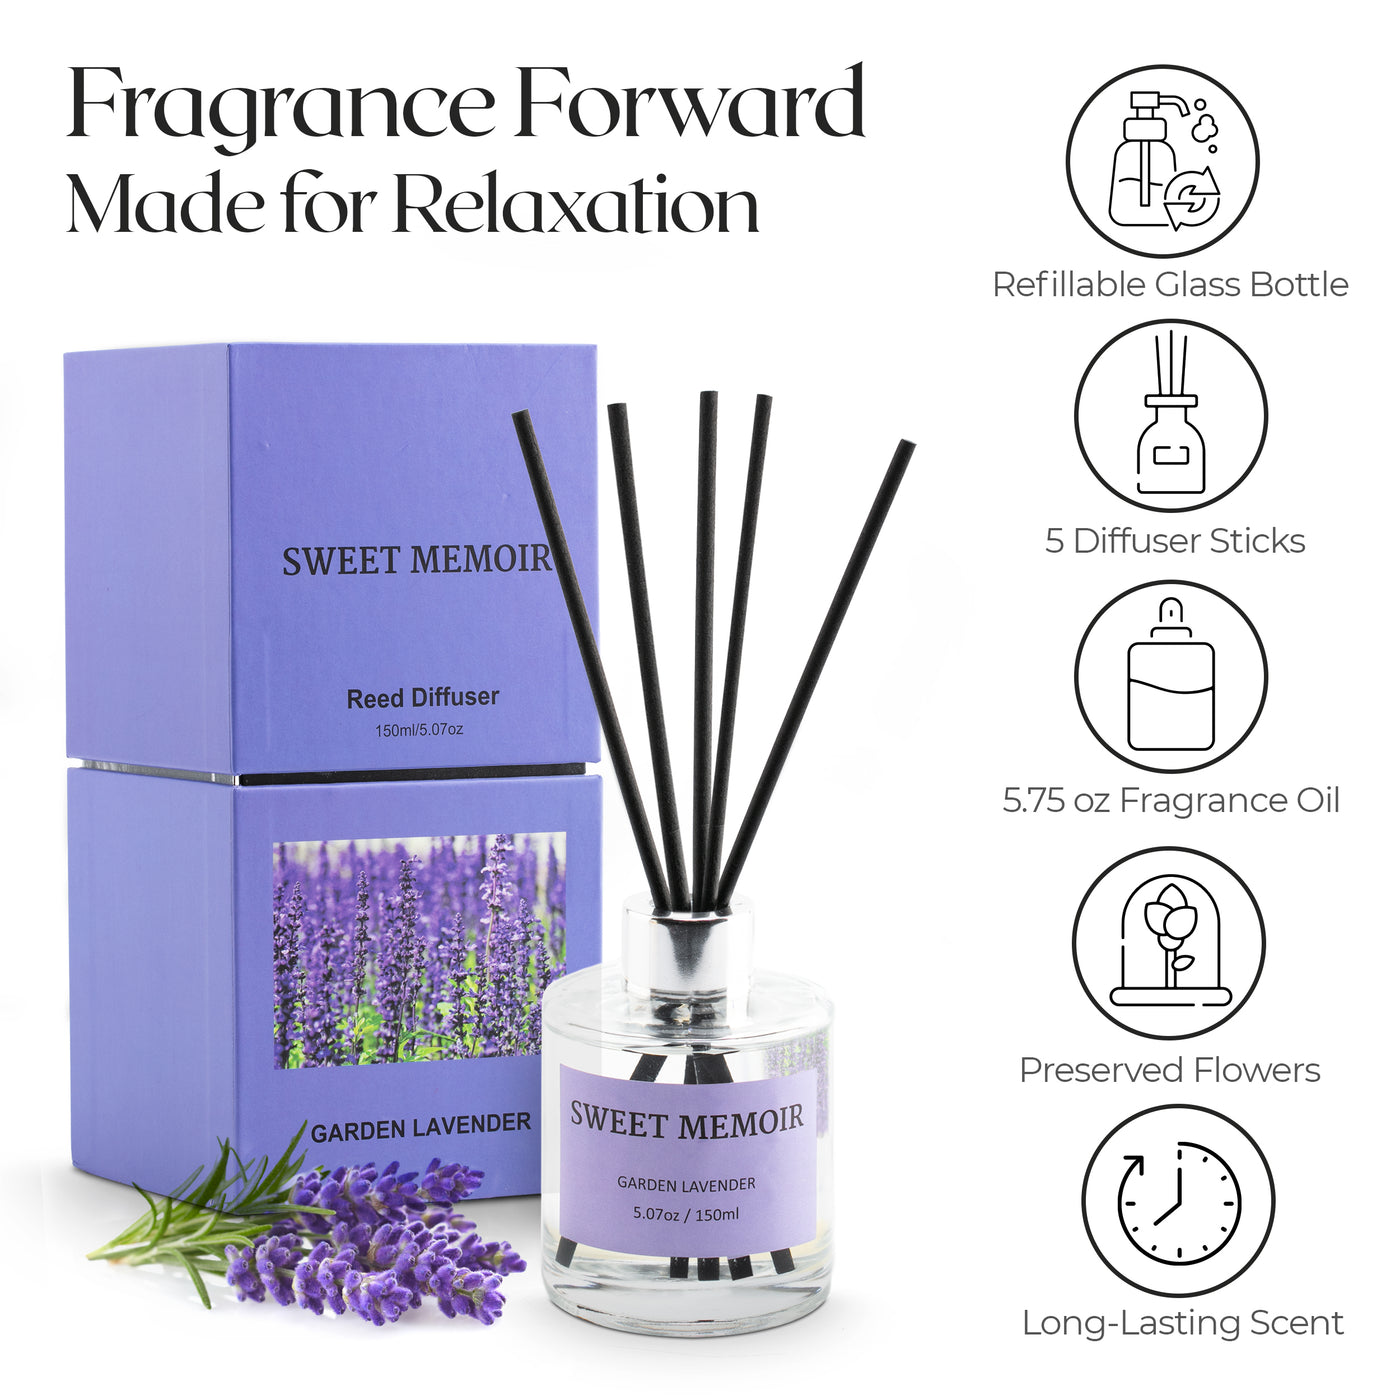 Infographic explaining features of Sweet Memoir reed diffusers including bottle size, fragrance longevity, and diffusion process.